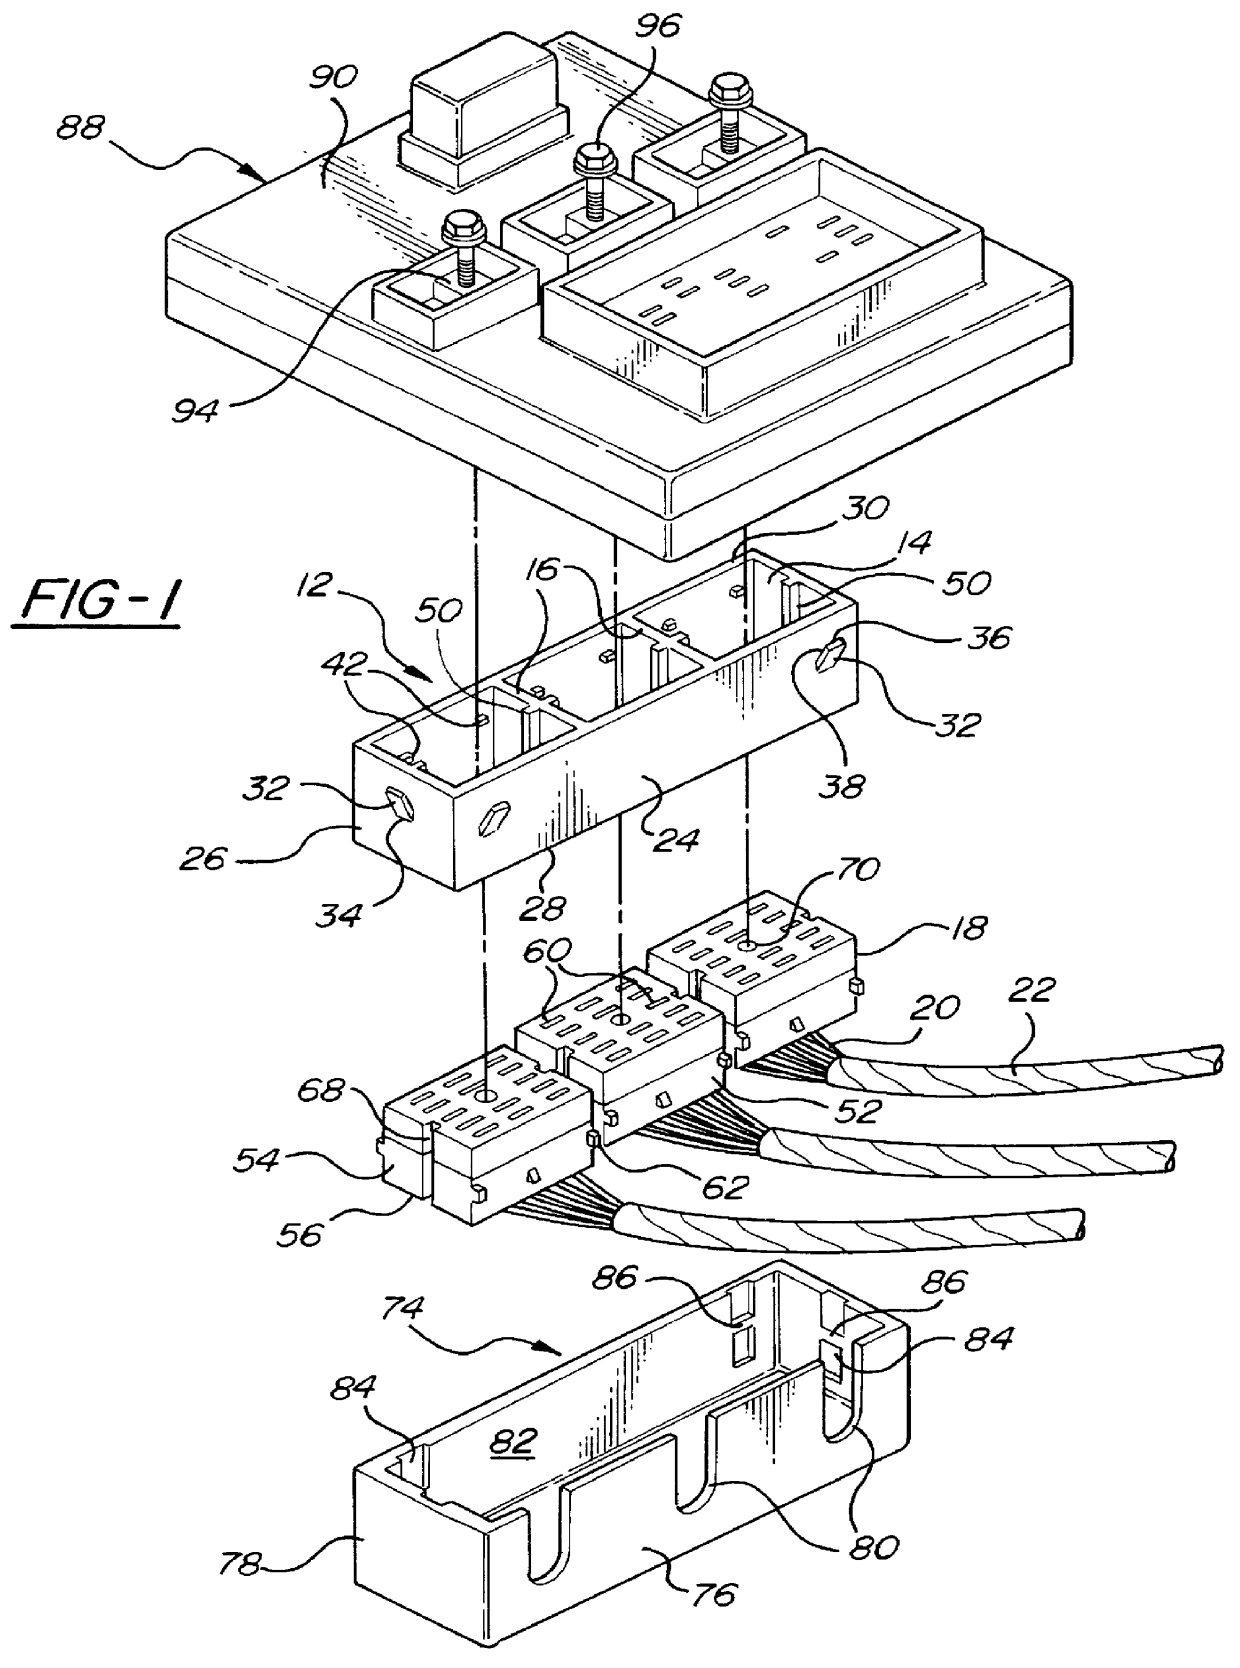 Junction block bracket for floating connector attachment